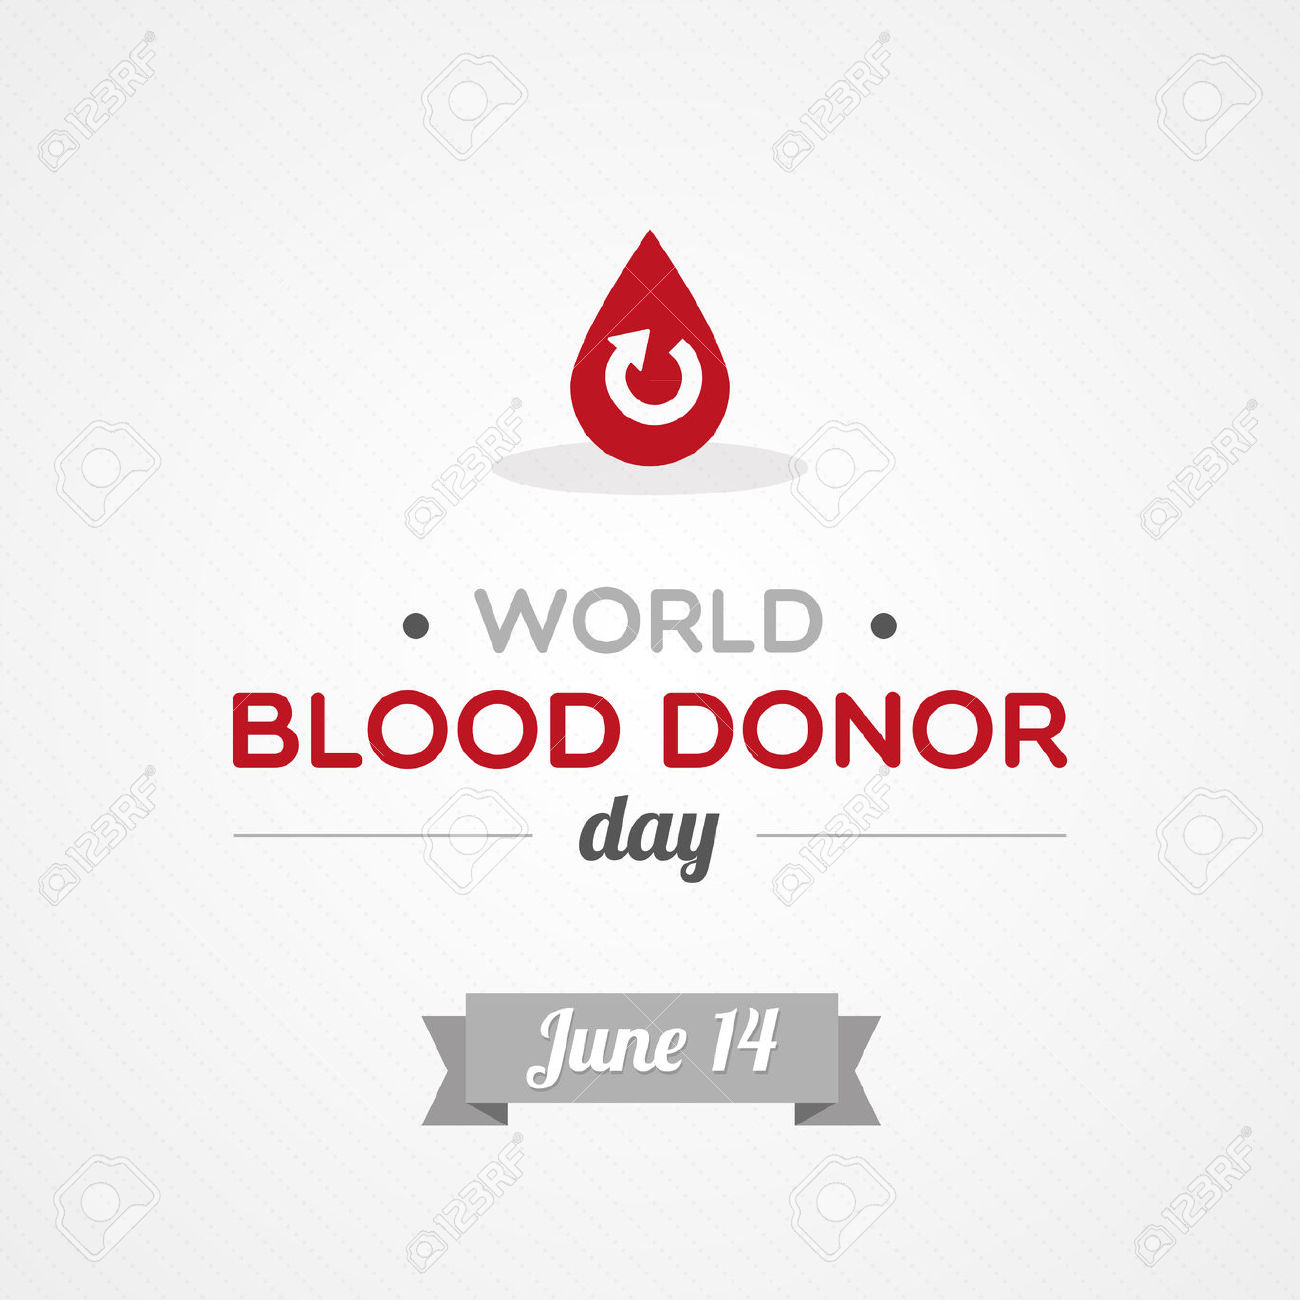 World Blood Donor Day June 14